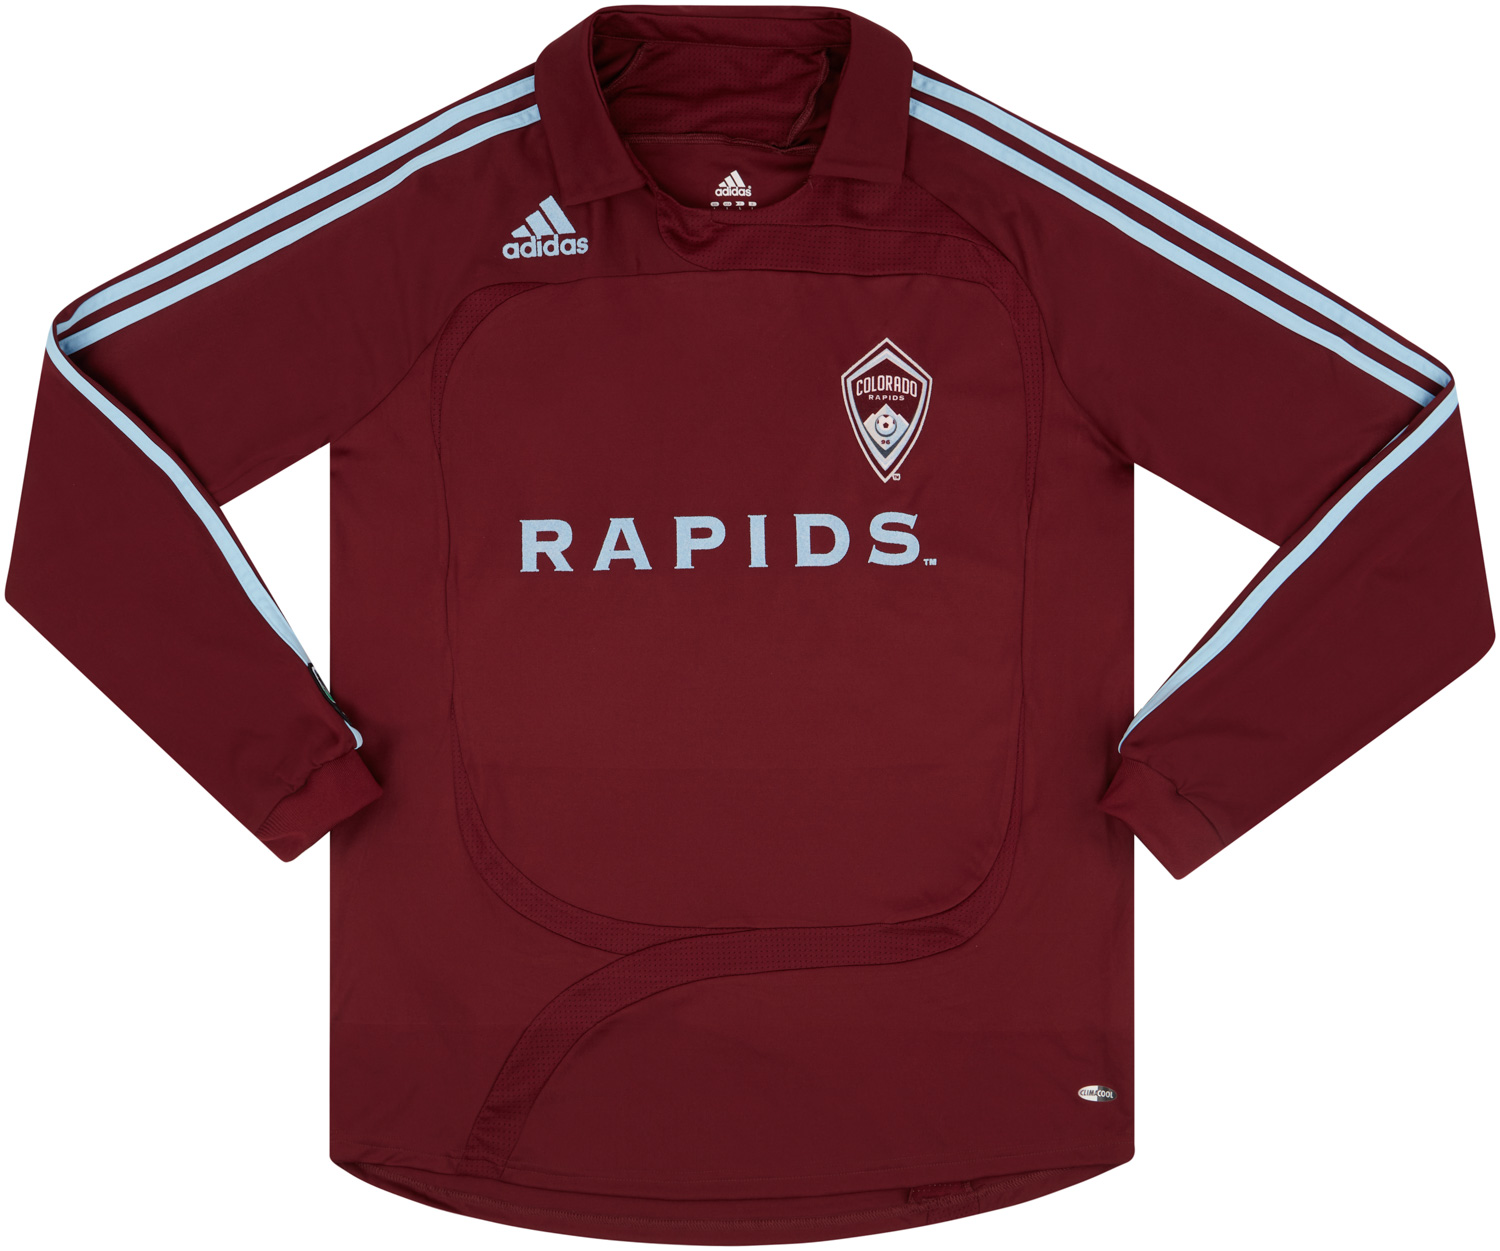 2007 Colorado Rapids Match Issue Signed Home Shirt Prideaux #6